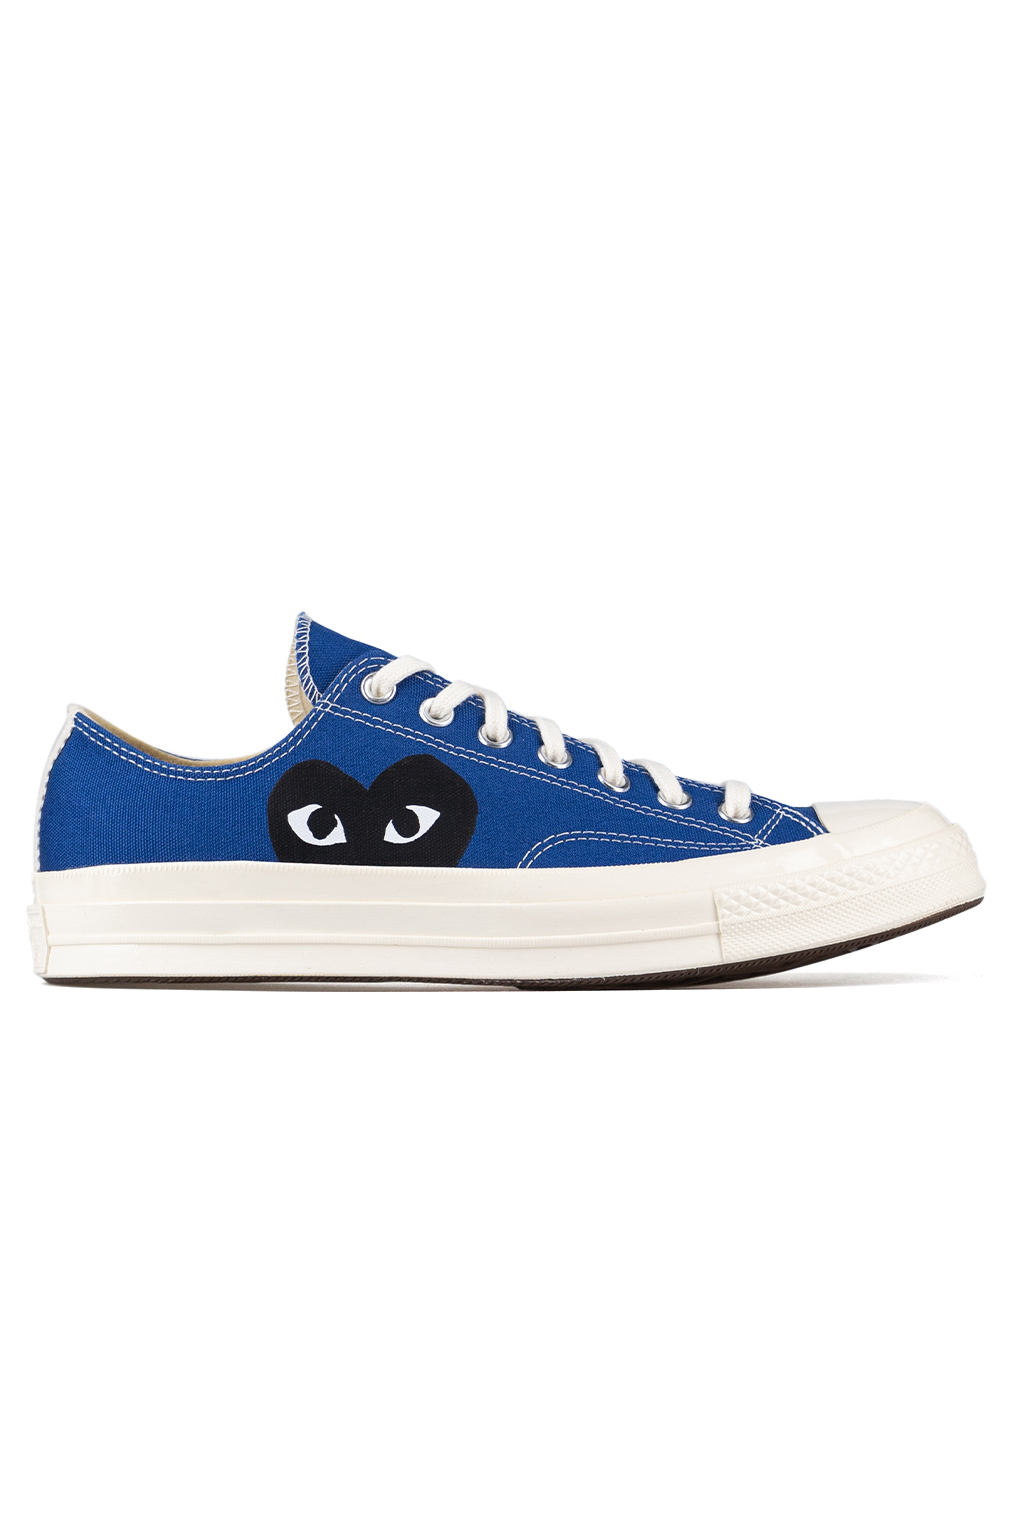 Comme Des Garcons Play Blue Converse - Half Heart Chuck 70 Low Sneakers